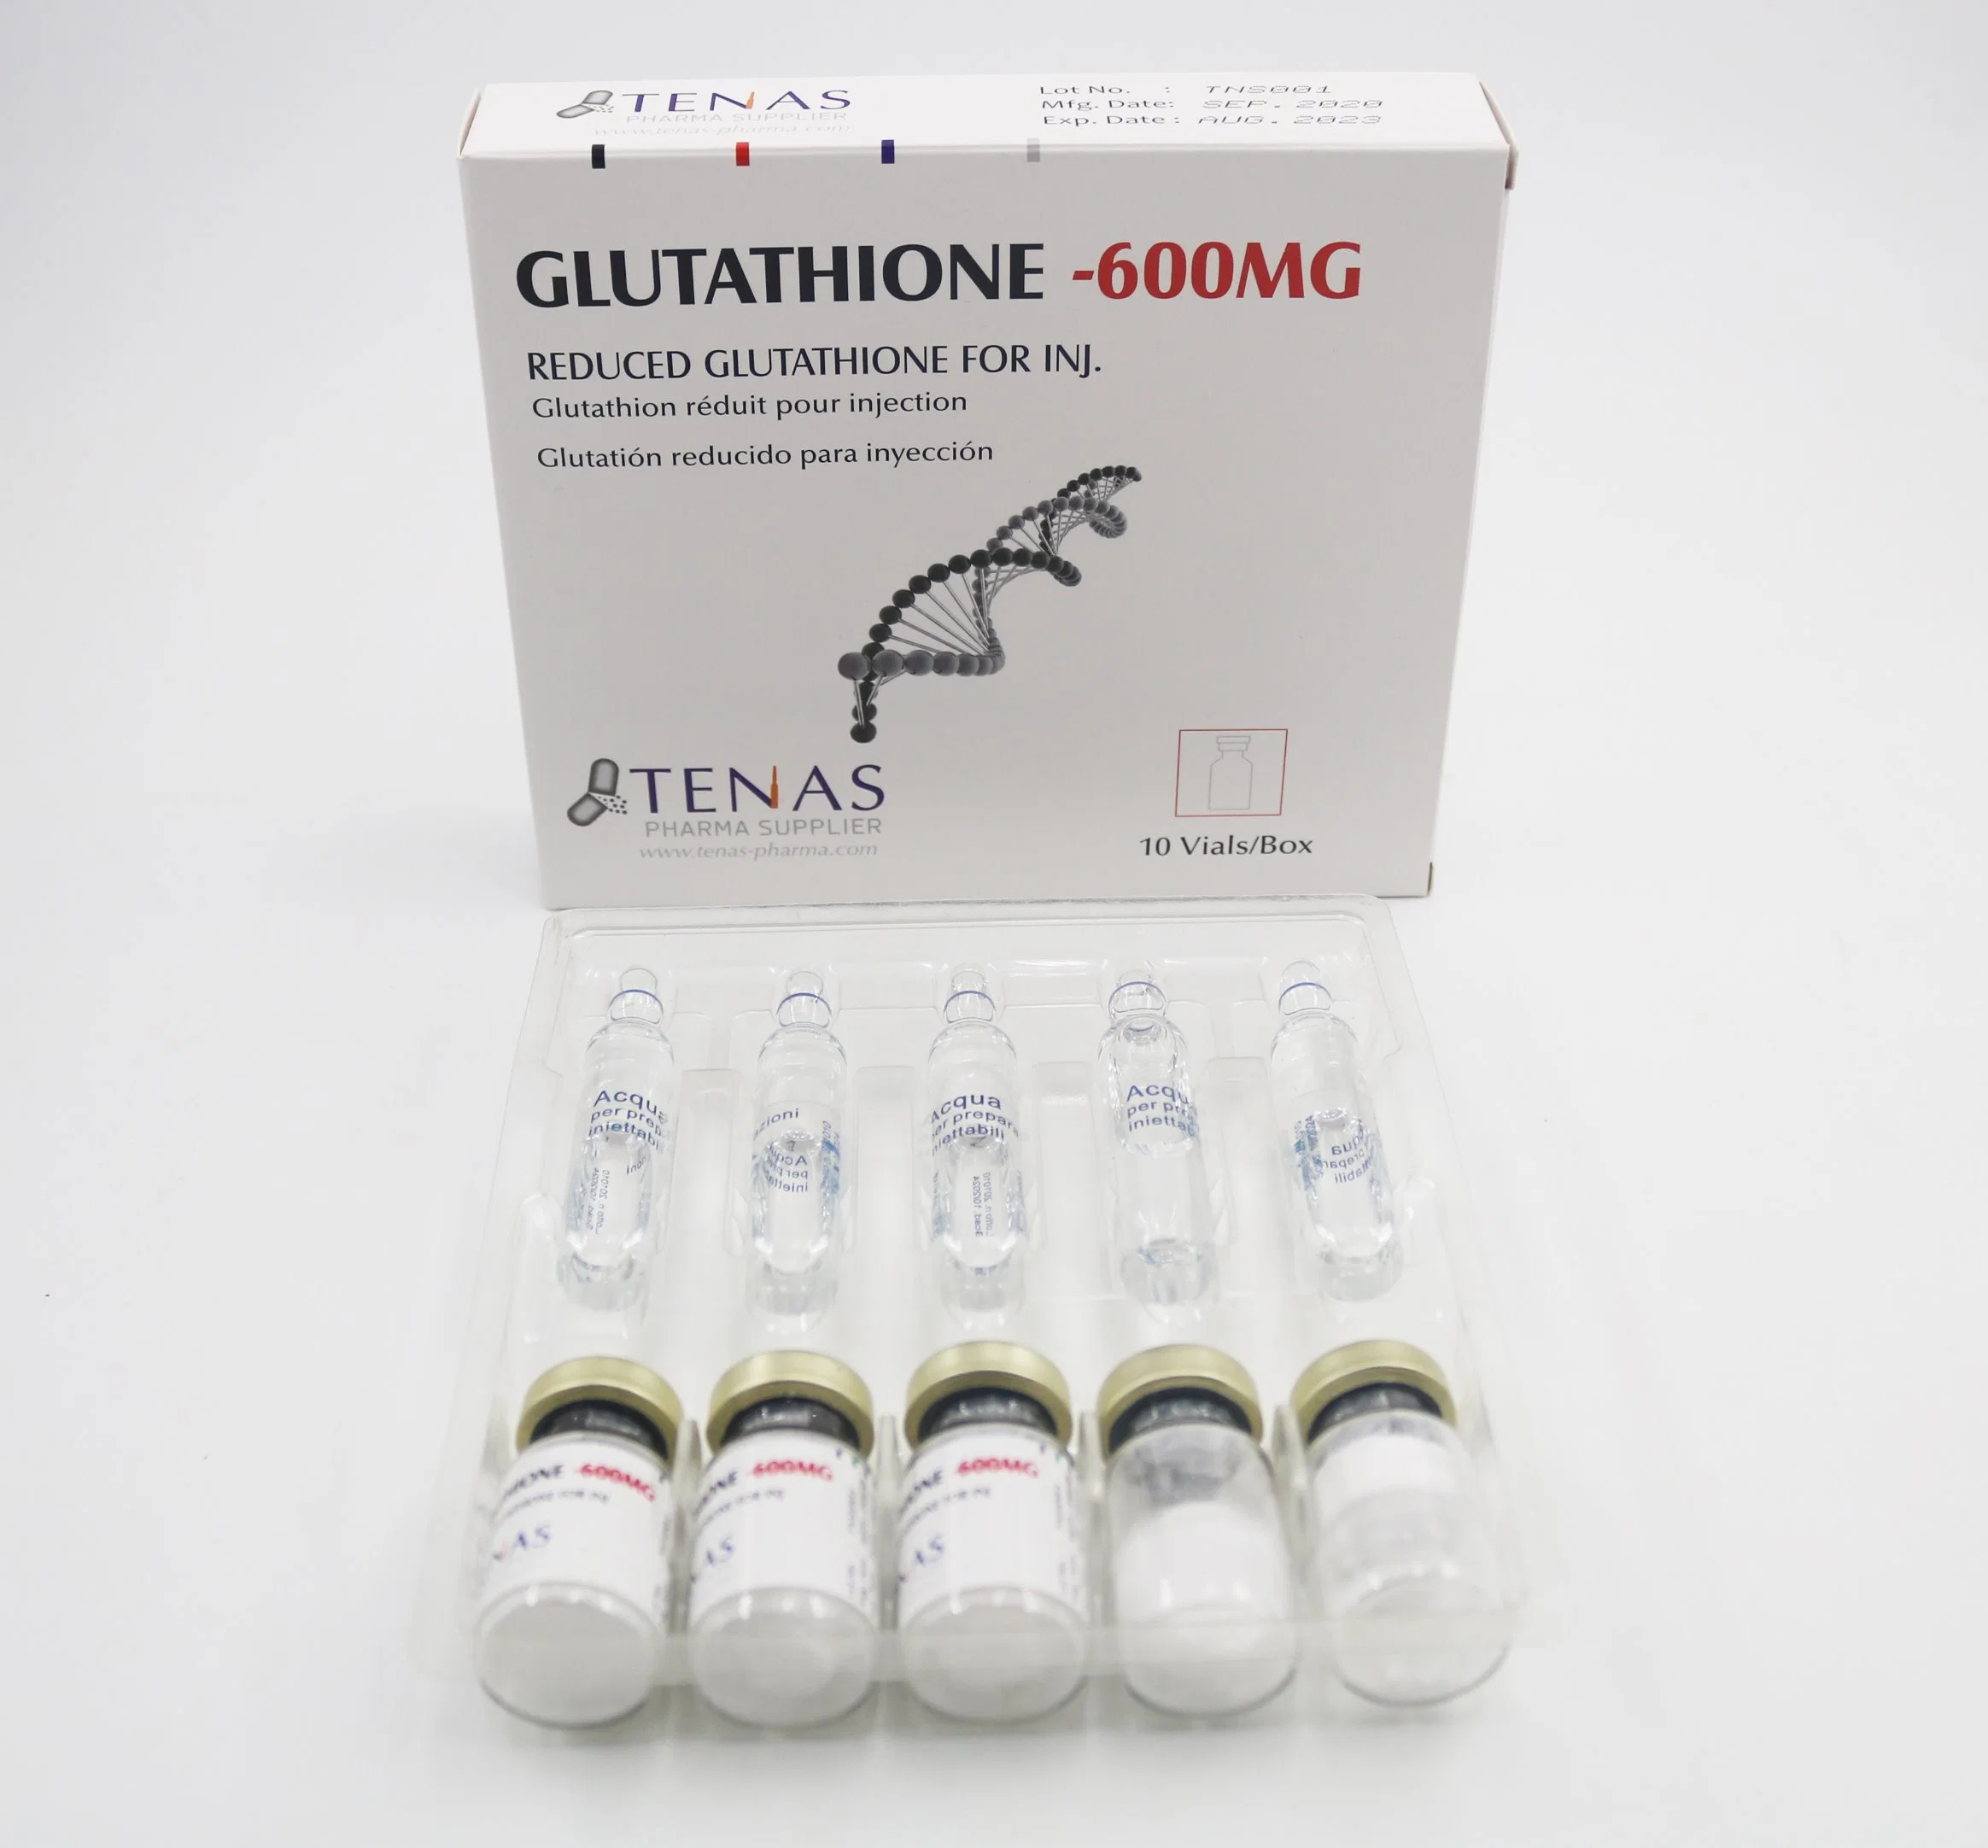 Good Price Glutathione Injection for Antiage, Skin Whiten, Protect Liver, 600mg, 1200mg, 2400mg, 3000mg